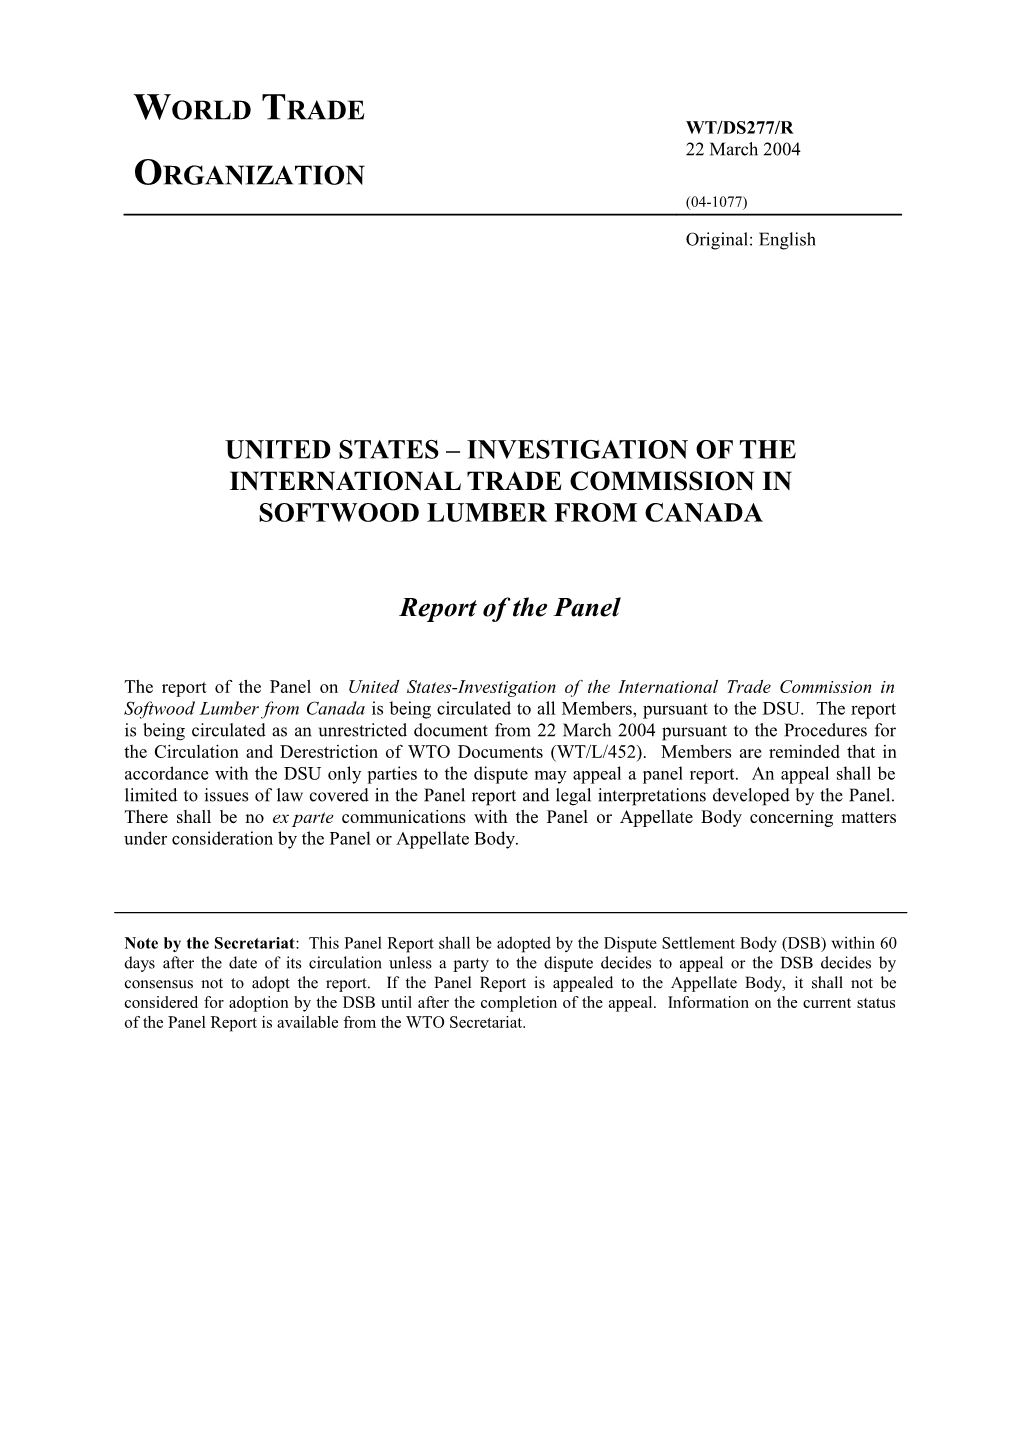 United States Investigation of the International Trade Commission In